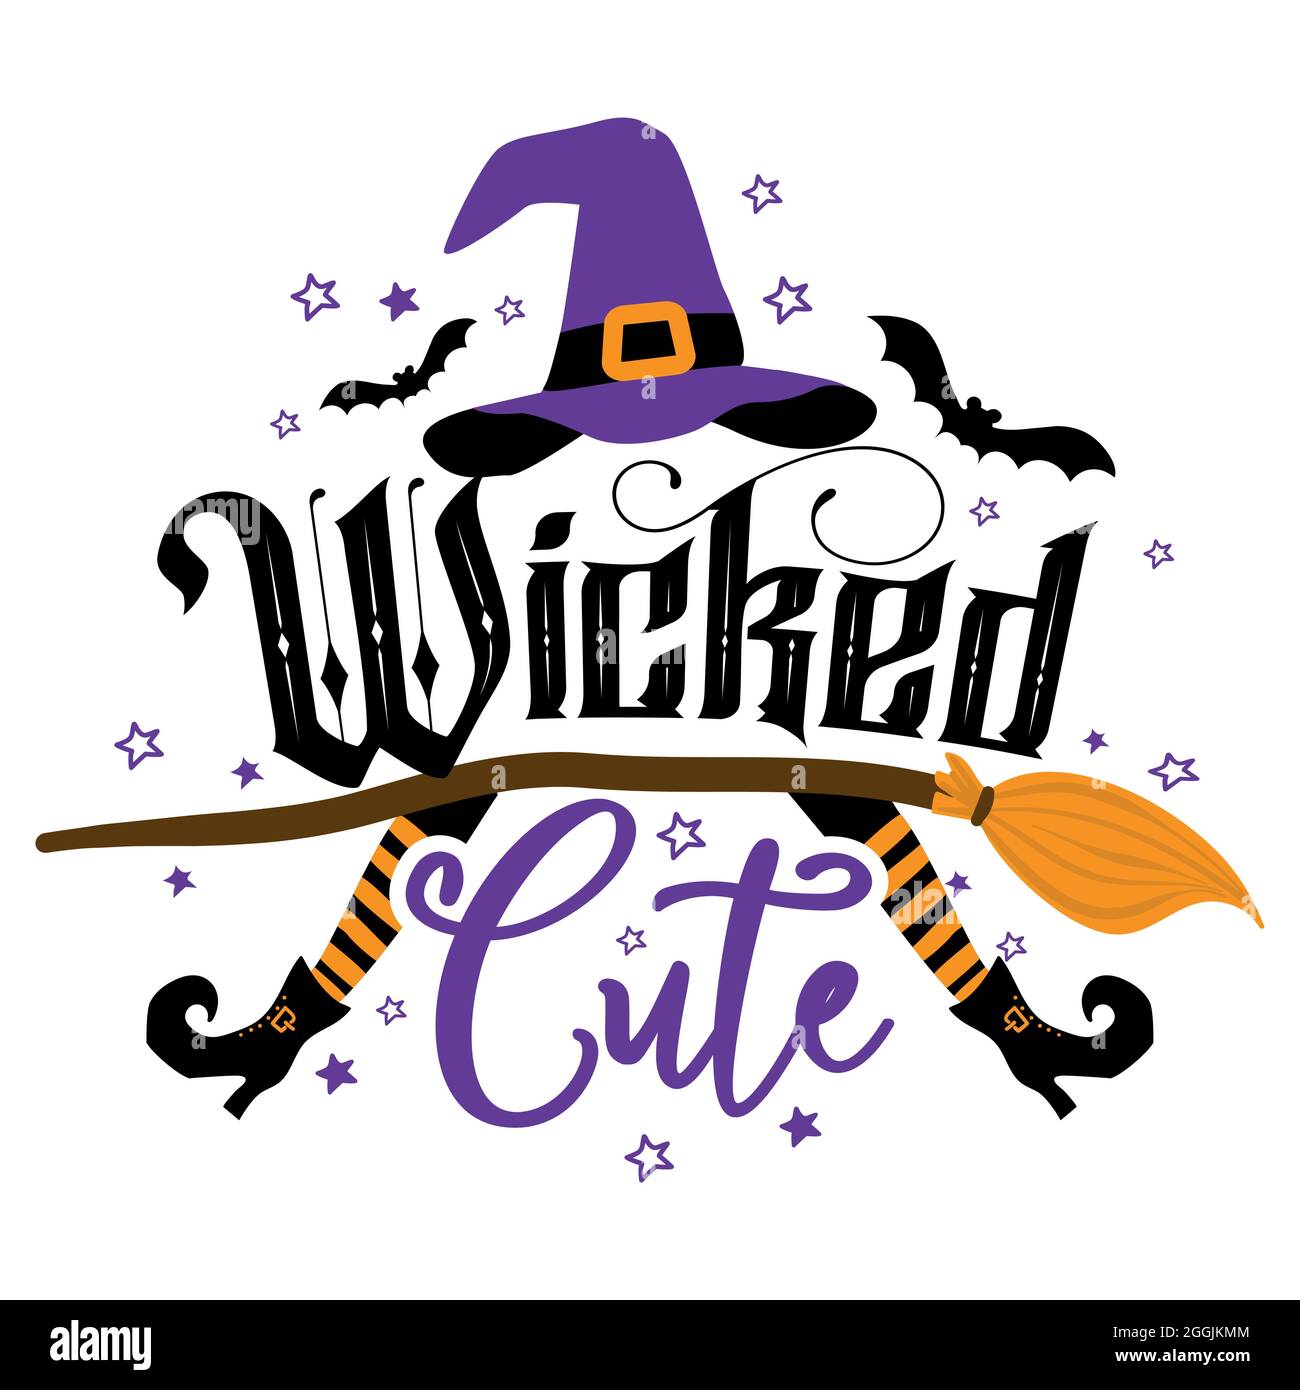 Wicked cute - Halloween quote on white background with broom, bats and witch hat. Good for t-shirt, mug, scrap booking, gift, printing press. Holiday Stock Vector